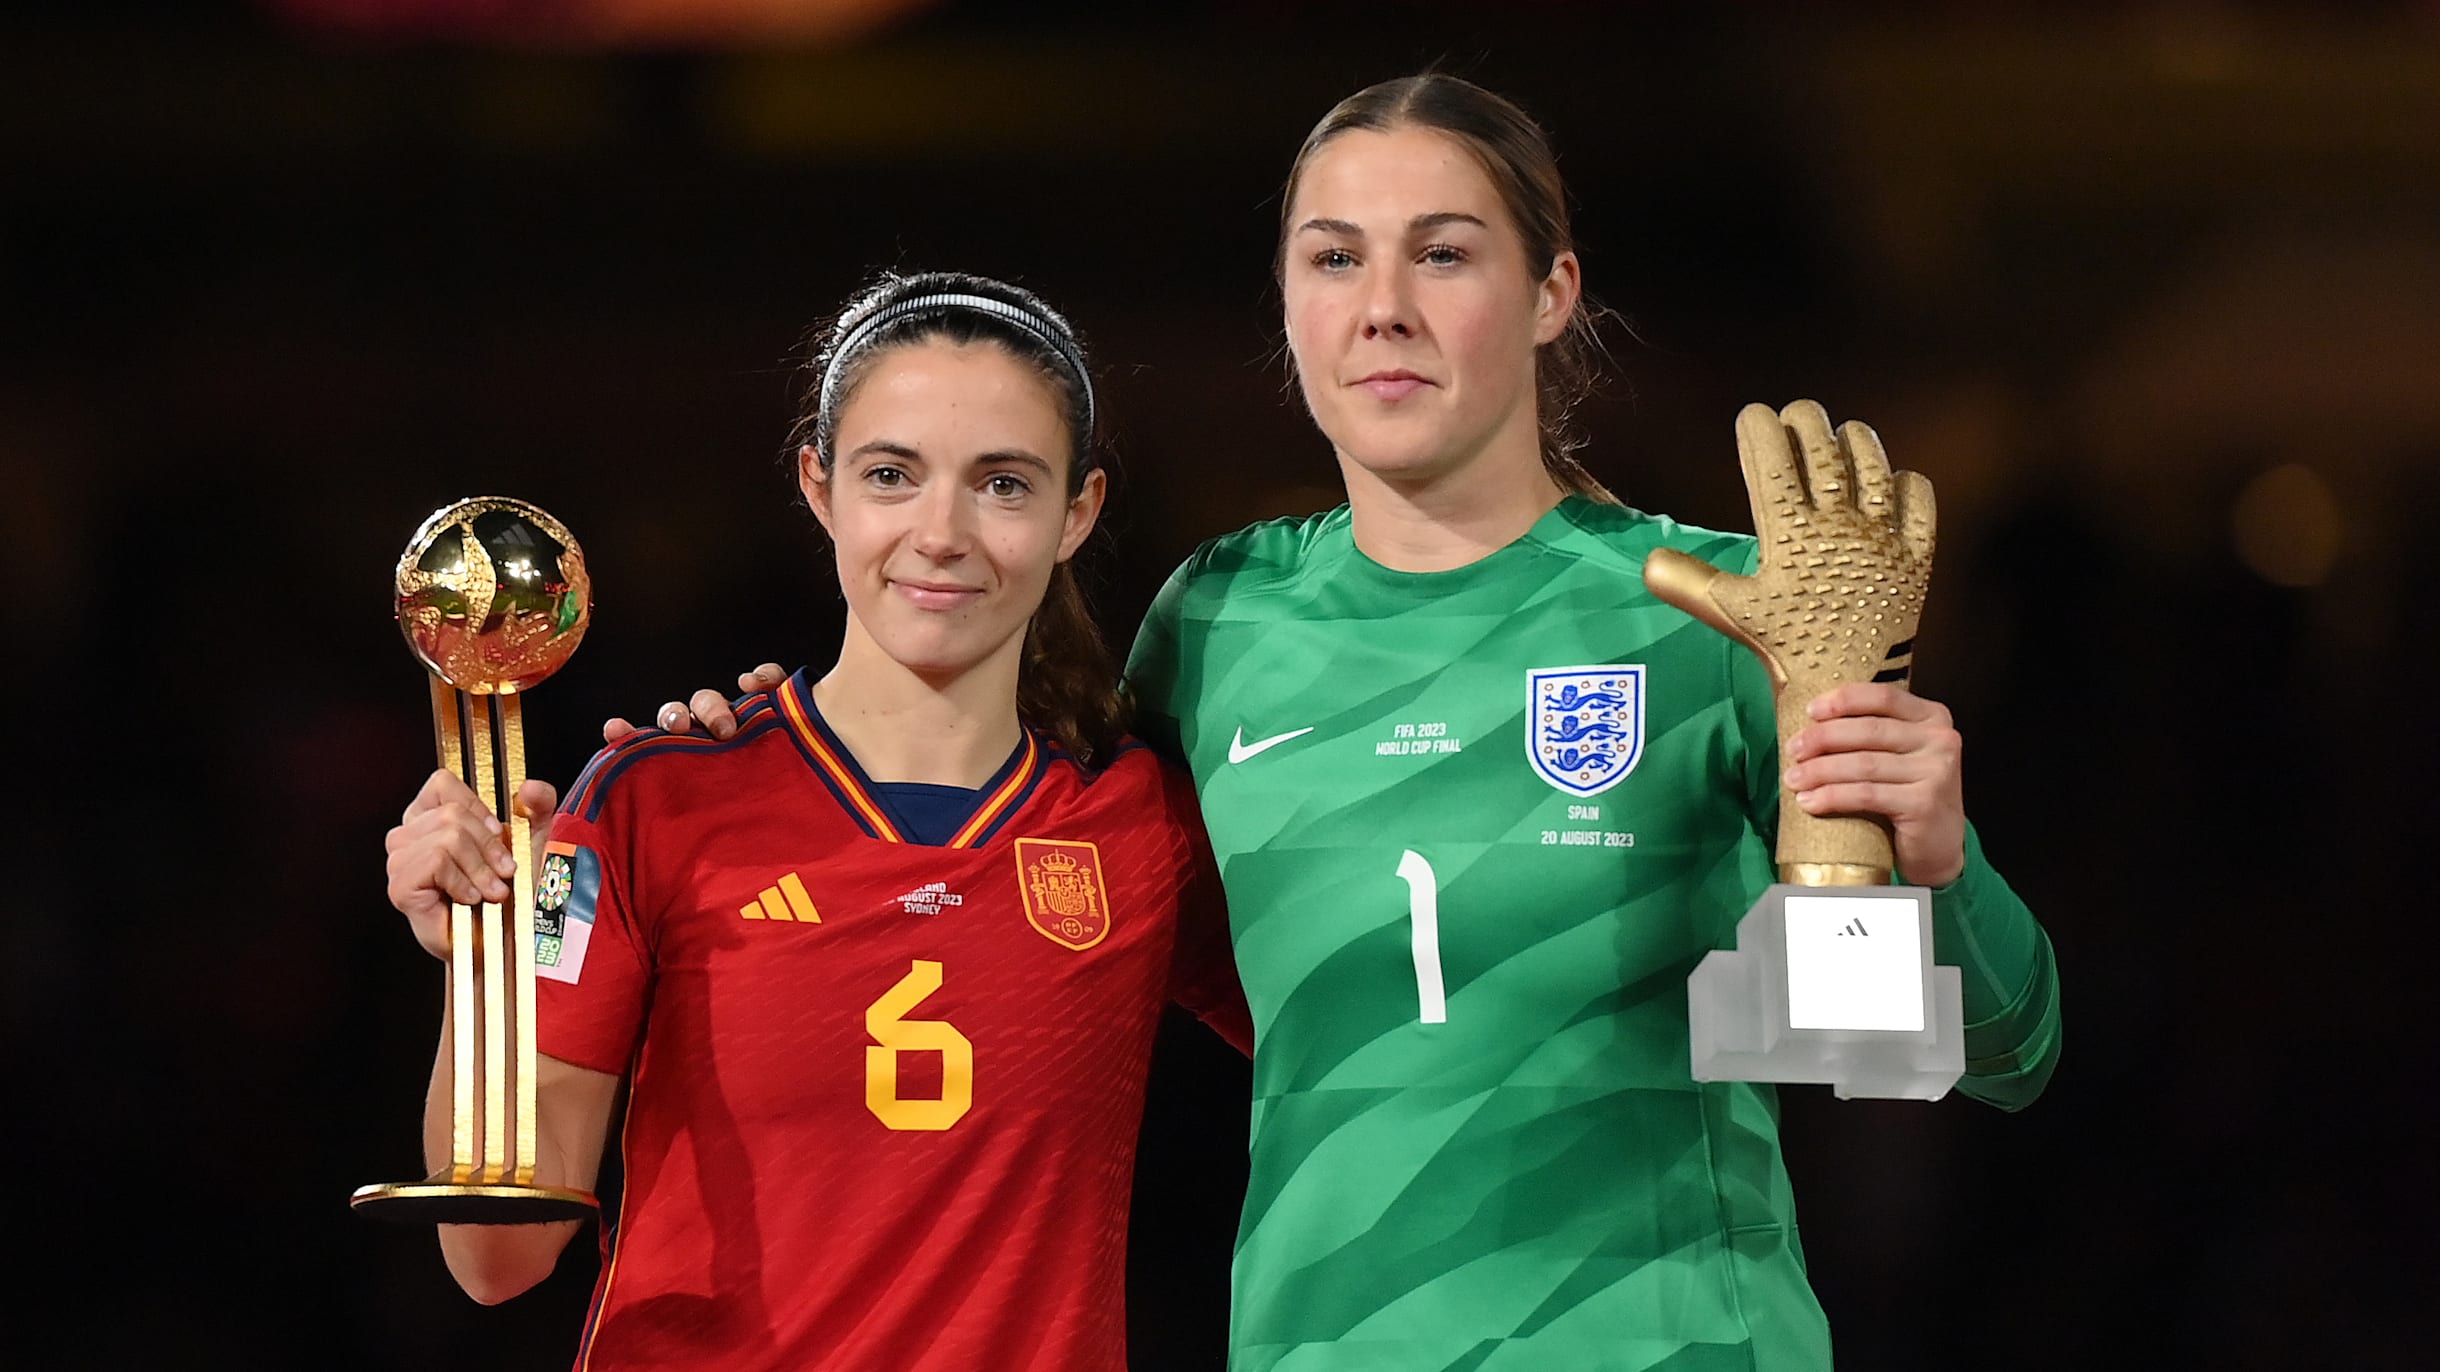 FIFA Women's World Cup winners list: Know all the champions